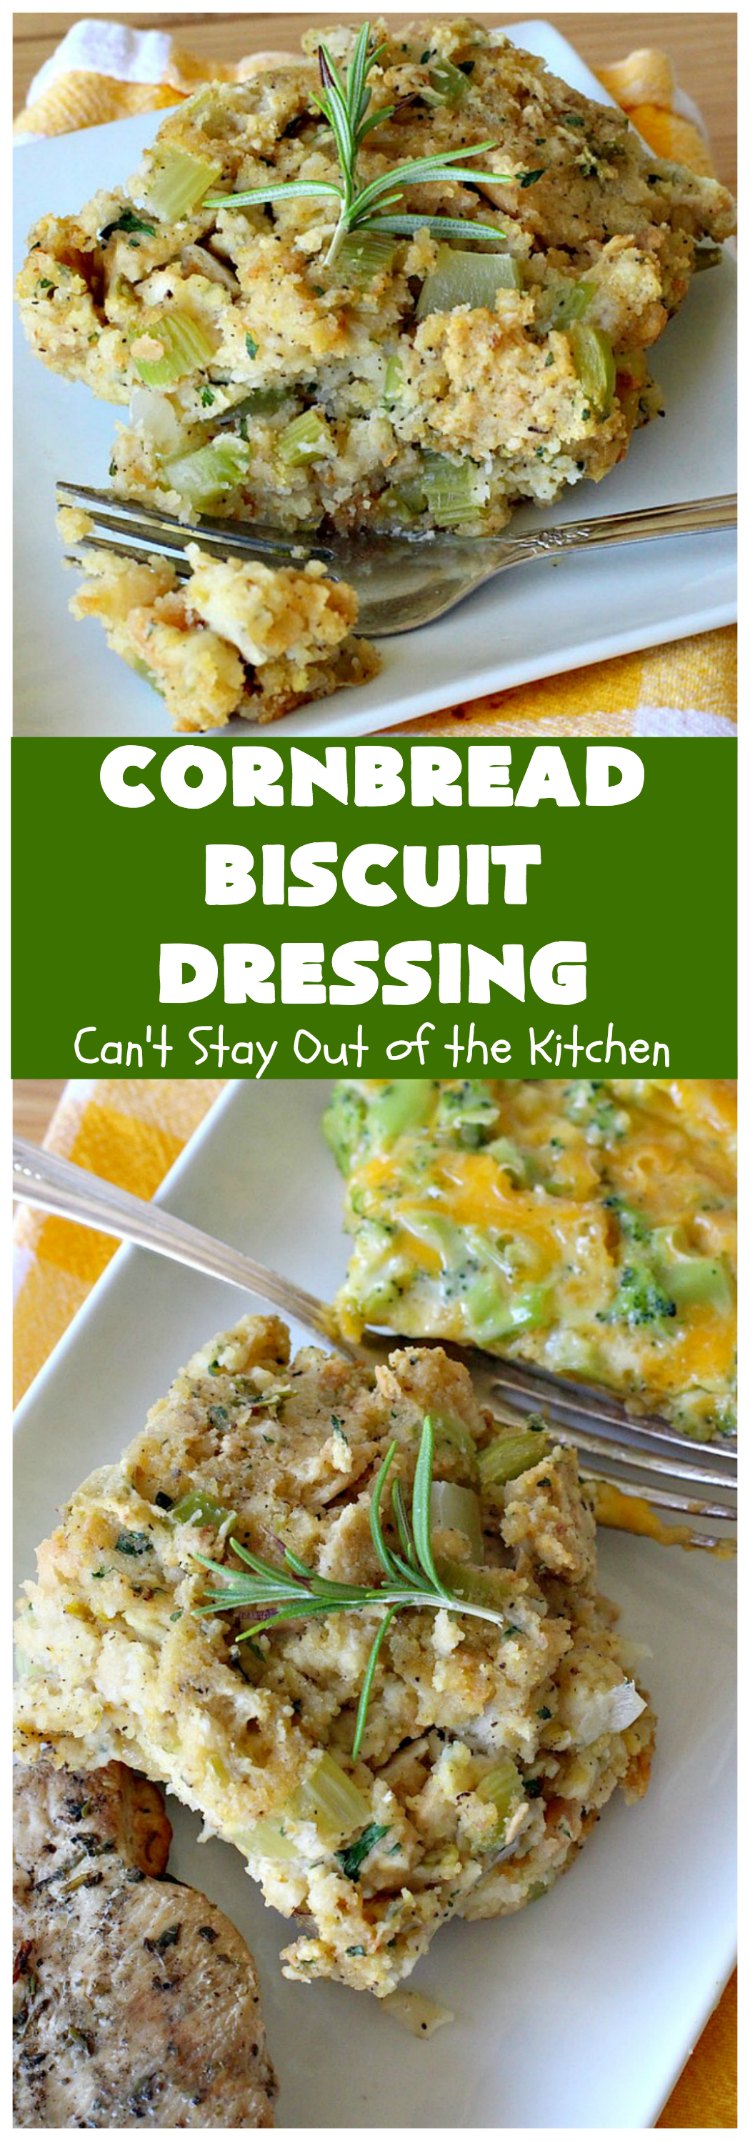 Cornbread Biscuit Dressing | Can't Stay Out of the Kitchen